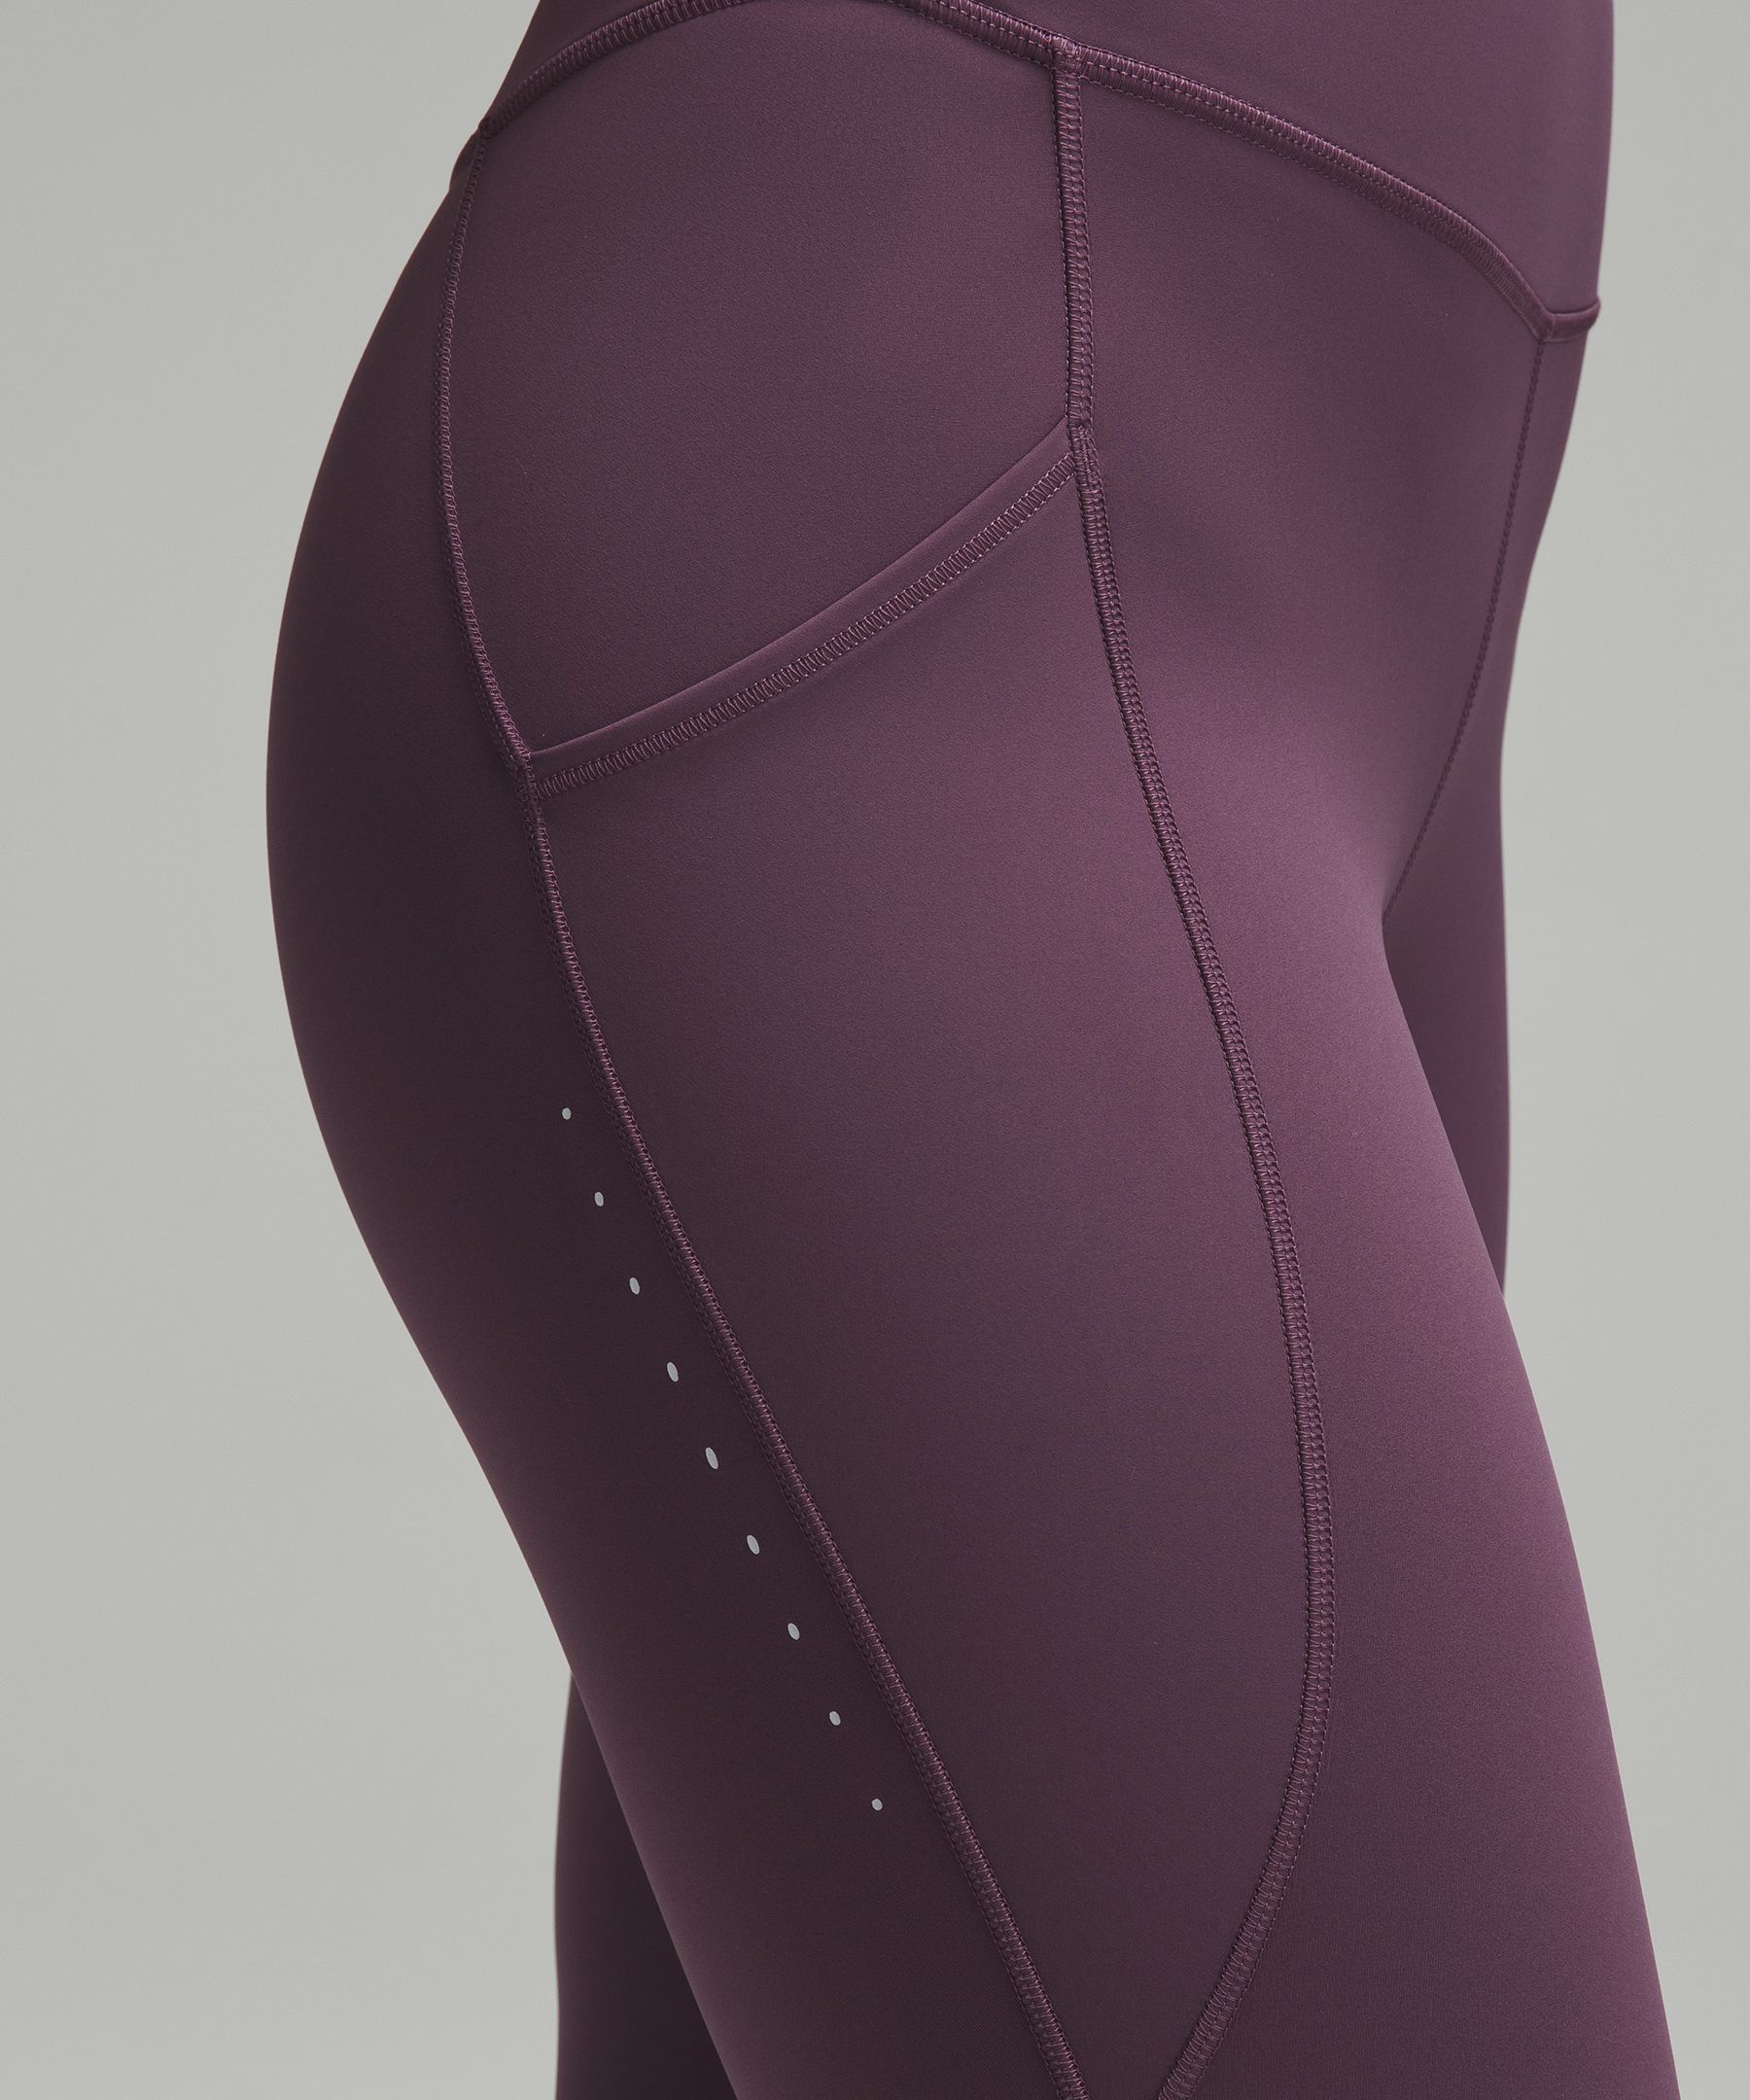 Lululemon NEW! Size 2 Fast and Free HR Tight 25” Running Leggings Paint  Multi Multiple - $100 (21% Off Retail) New With Tags - From Jennifer